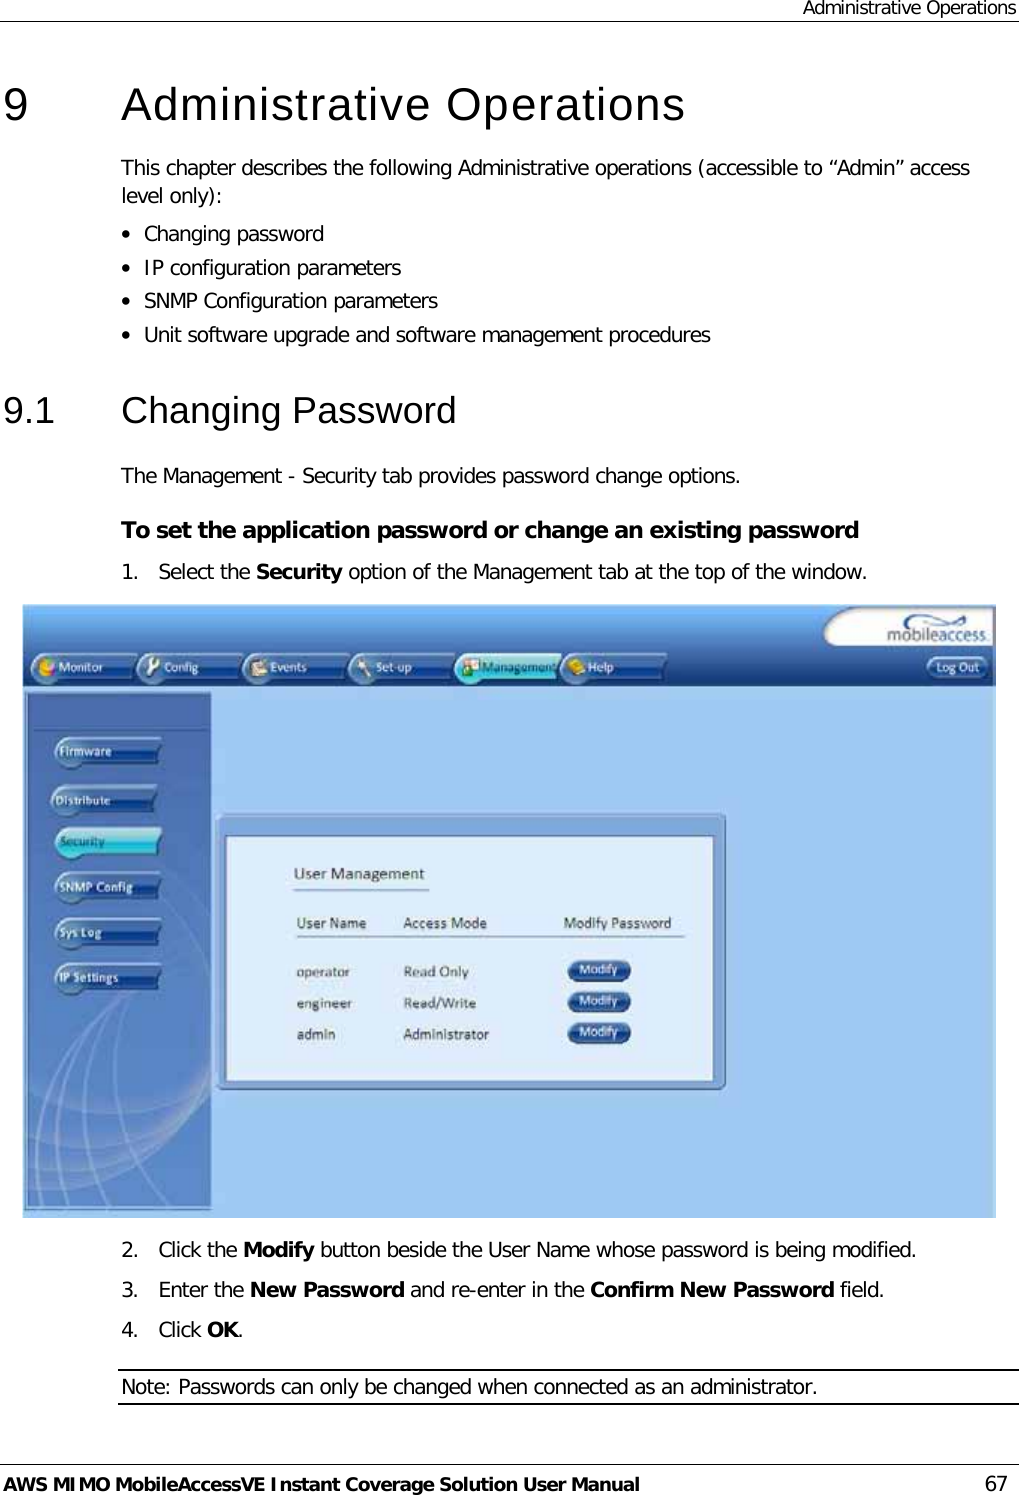 Administrative Operations AWS MIMO MobileAccessVE Instant Coverage Solution User Manual  67 9  Administrative Operations This chapter describes the following Administrative operations (accessible to “Admin” access level only): • Changing password • IP configuration parameters • SNMP Configuration parameters • Unit software upgrade and software management procedures 9.1  Changing Password The Management - Security tab provides password change options.  To set the application password or change an existing password 1.  Select the Security option of the Management tab at the top of the window.  2.  Click the Modify button beside the User Name whose password is being modified.  3.  Enter the New Password and re-enter in the Confirm New Password field. 4.  Click OK. Note: Passwords can only be changed when connected as an administrator. 